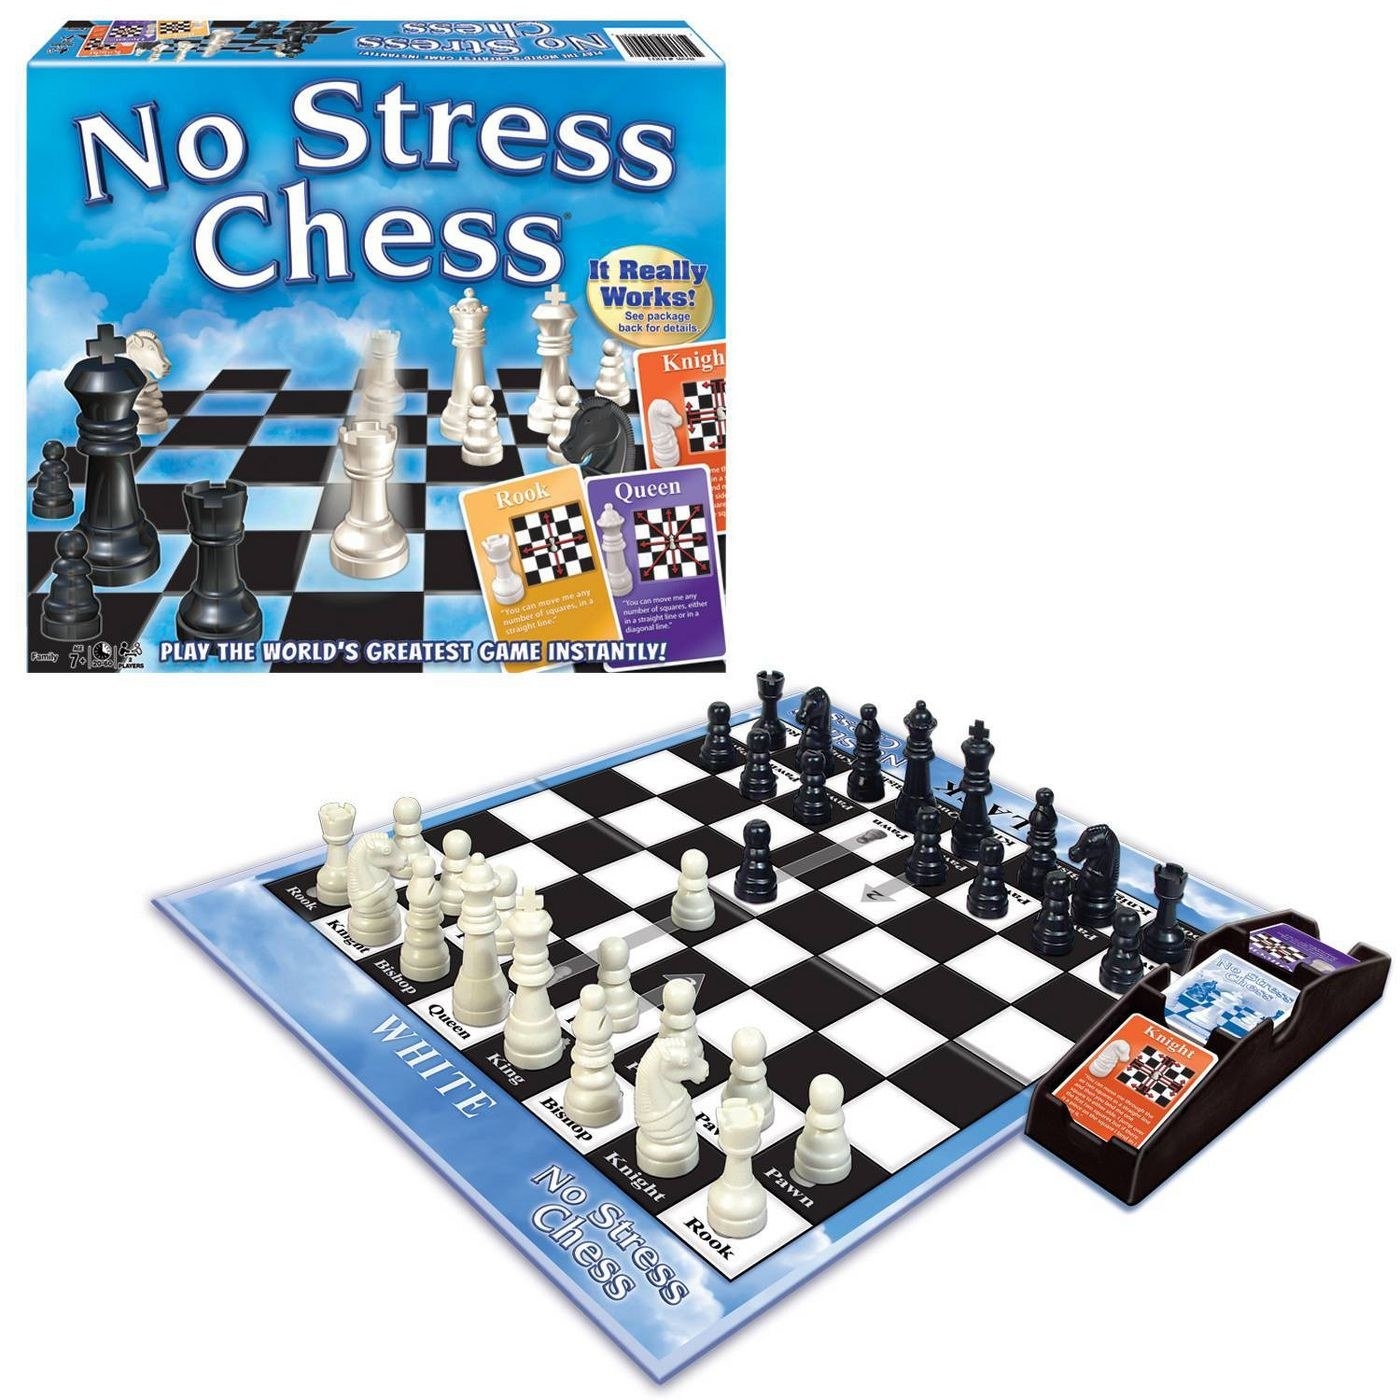 The No Stress Chess game